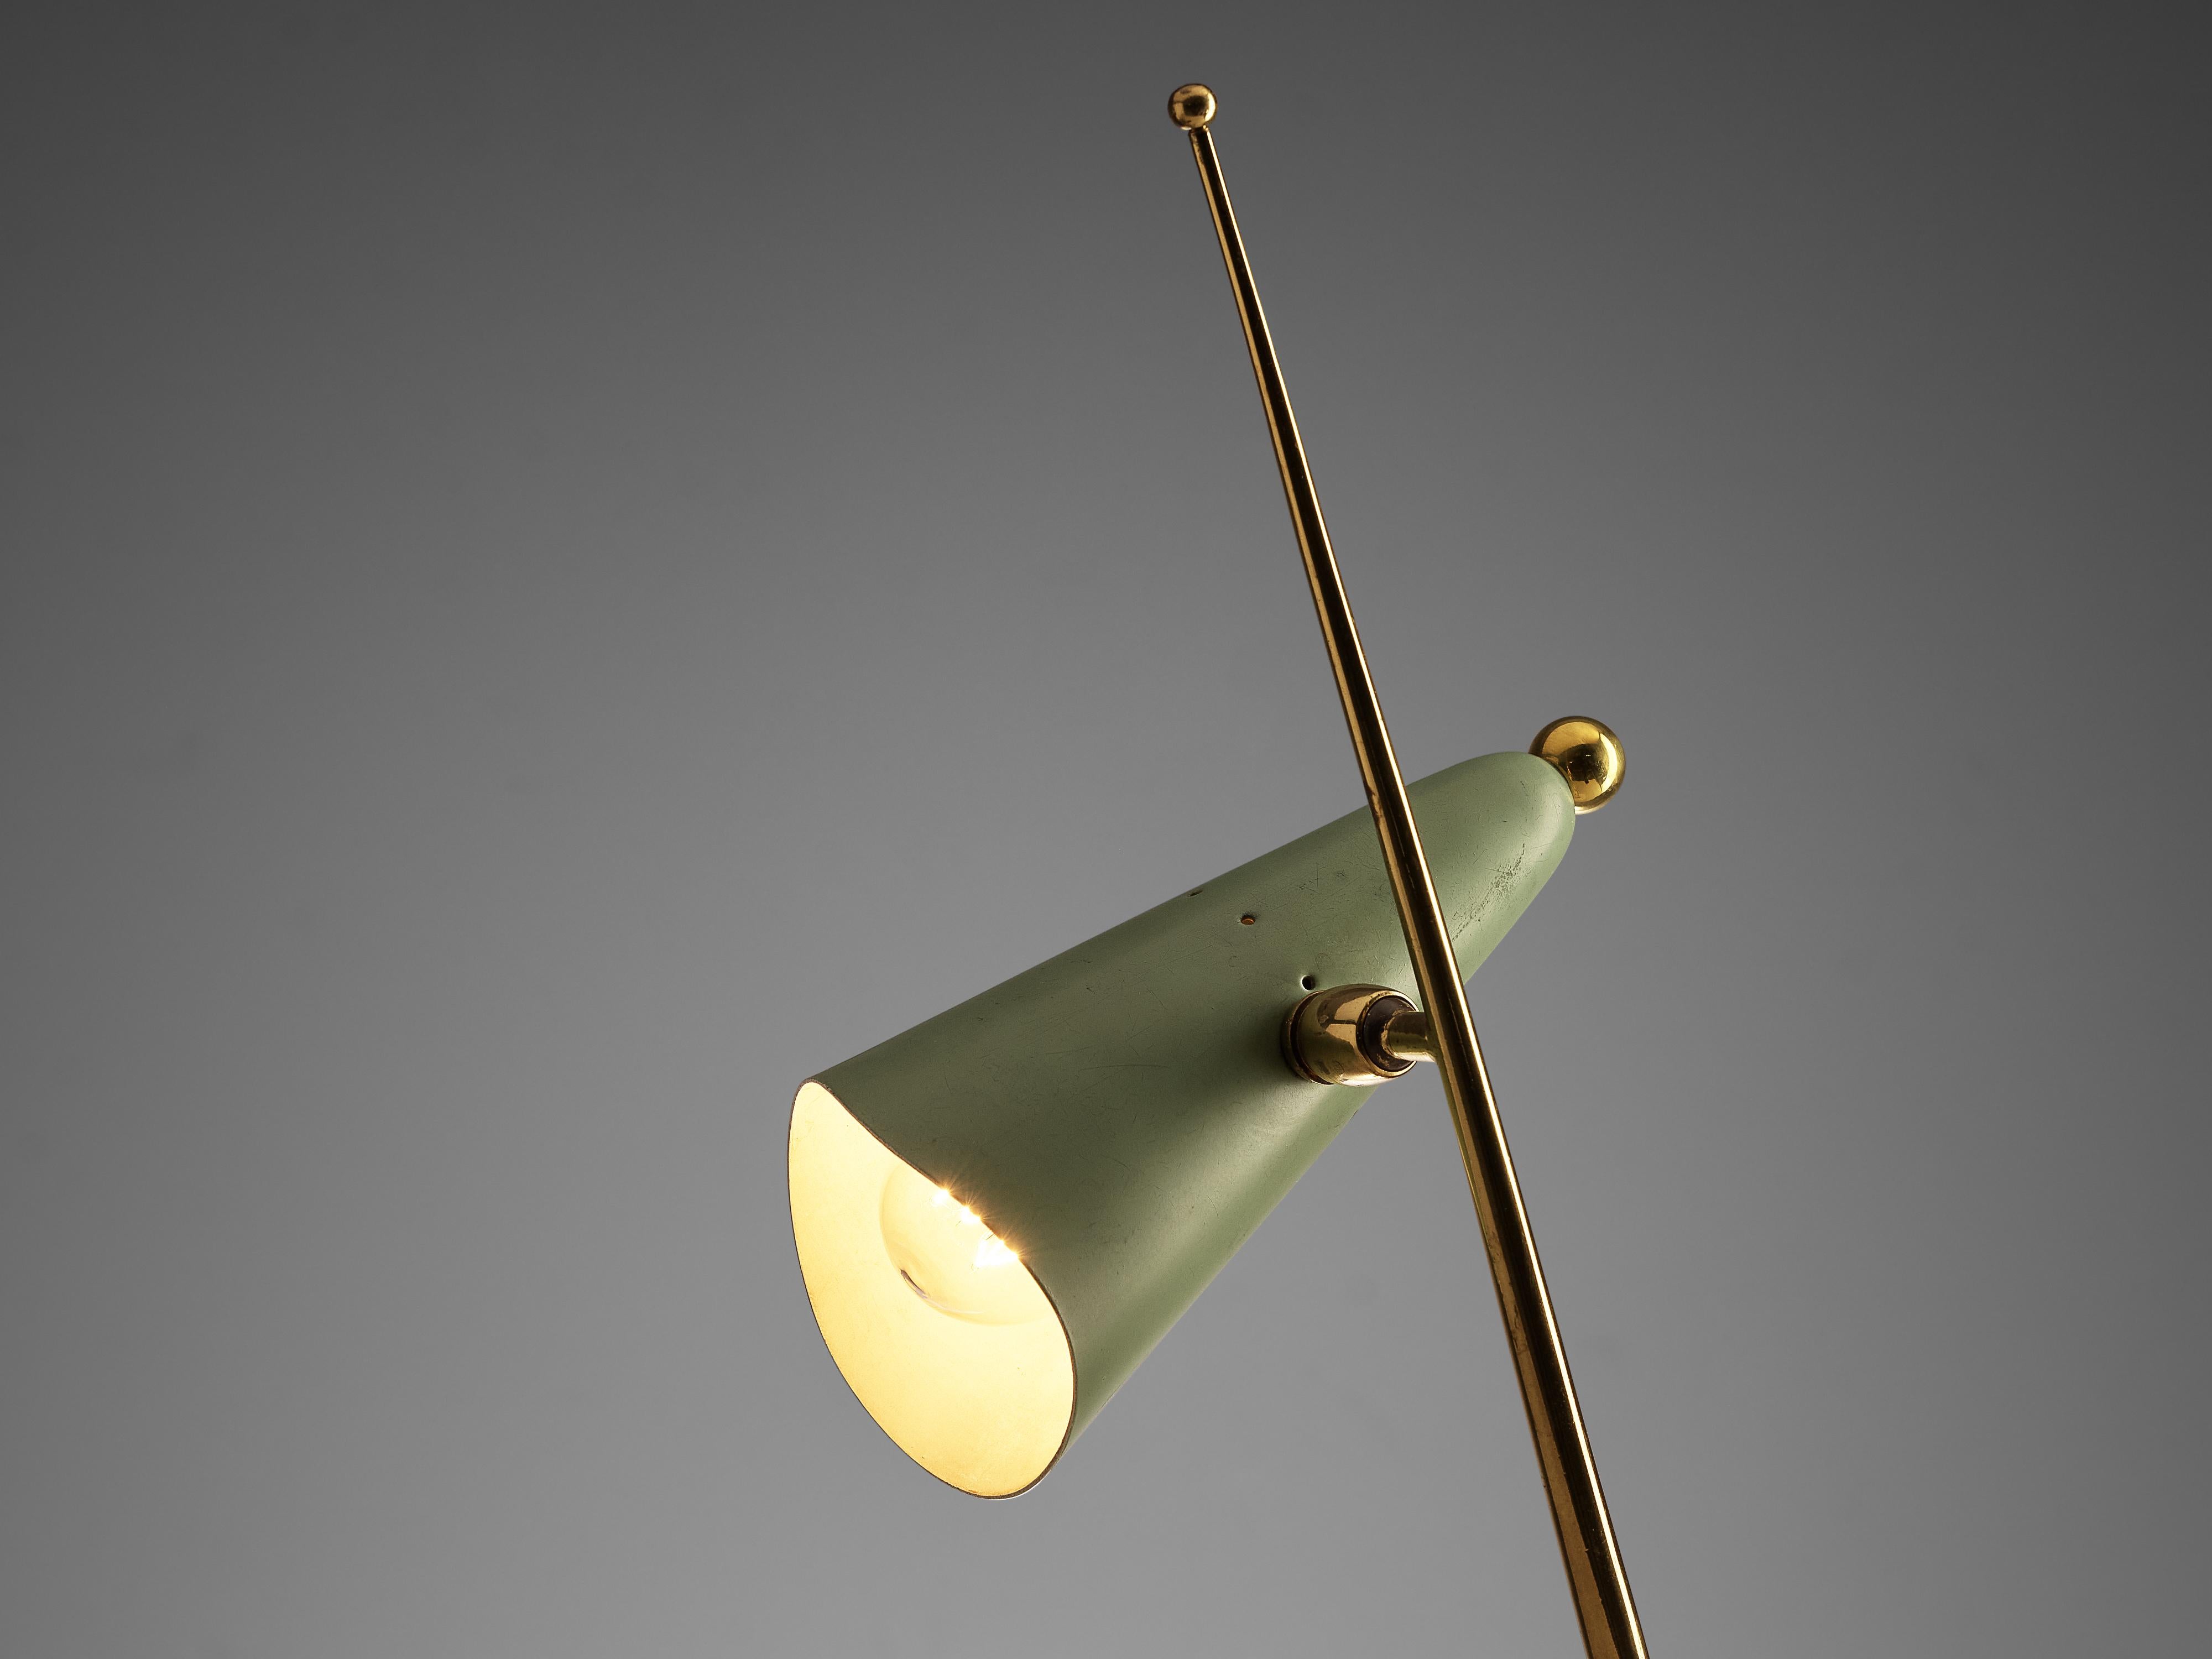 Mid-20th Century Adjustable Italian Table Lamp with Cone Shaped Shade in Mint Green